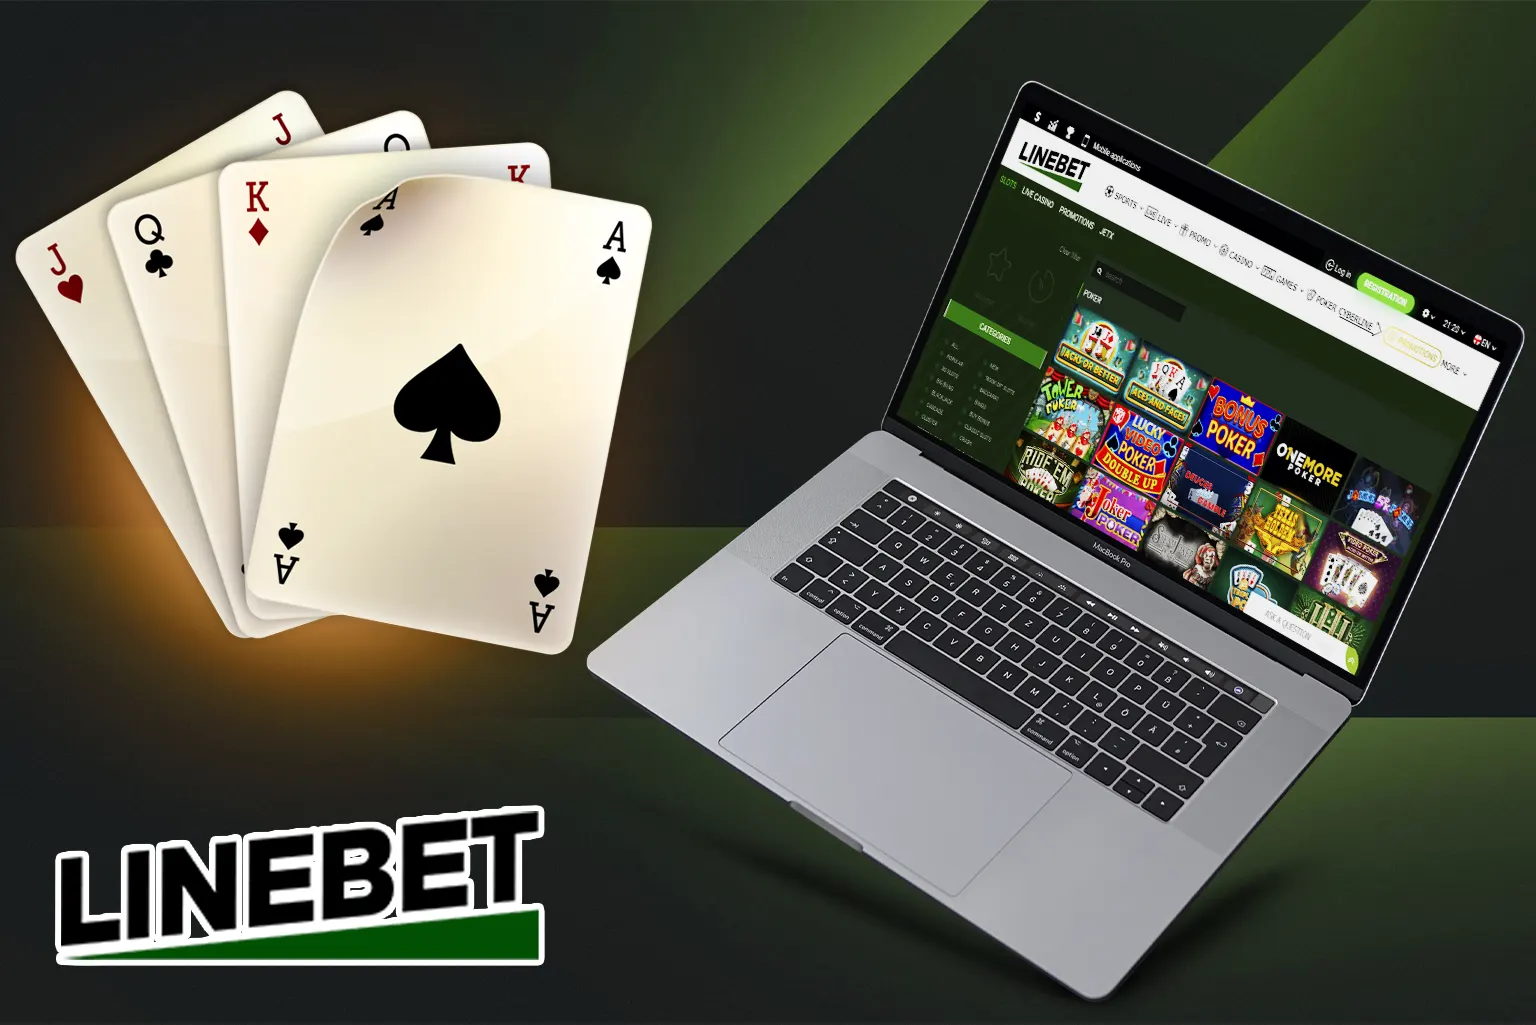 Players from India have the opportunity to play an exciting game at Linebet, where the key is to put together a combination and beat the other players.